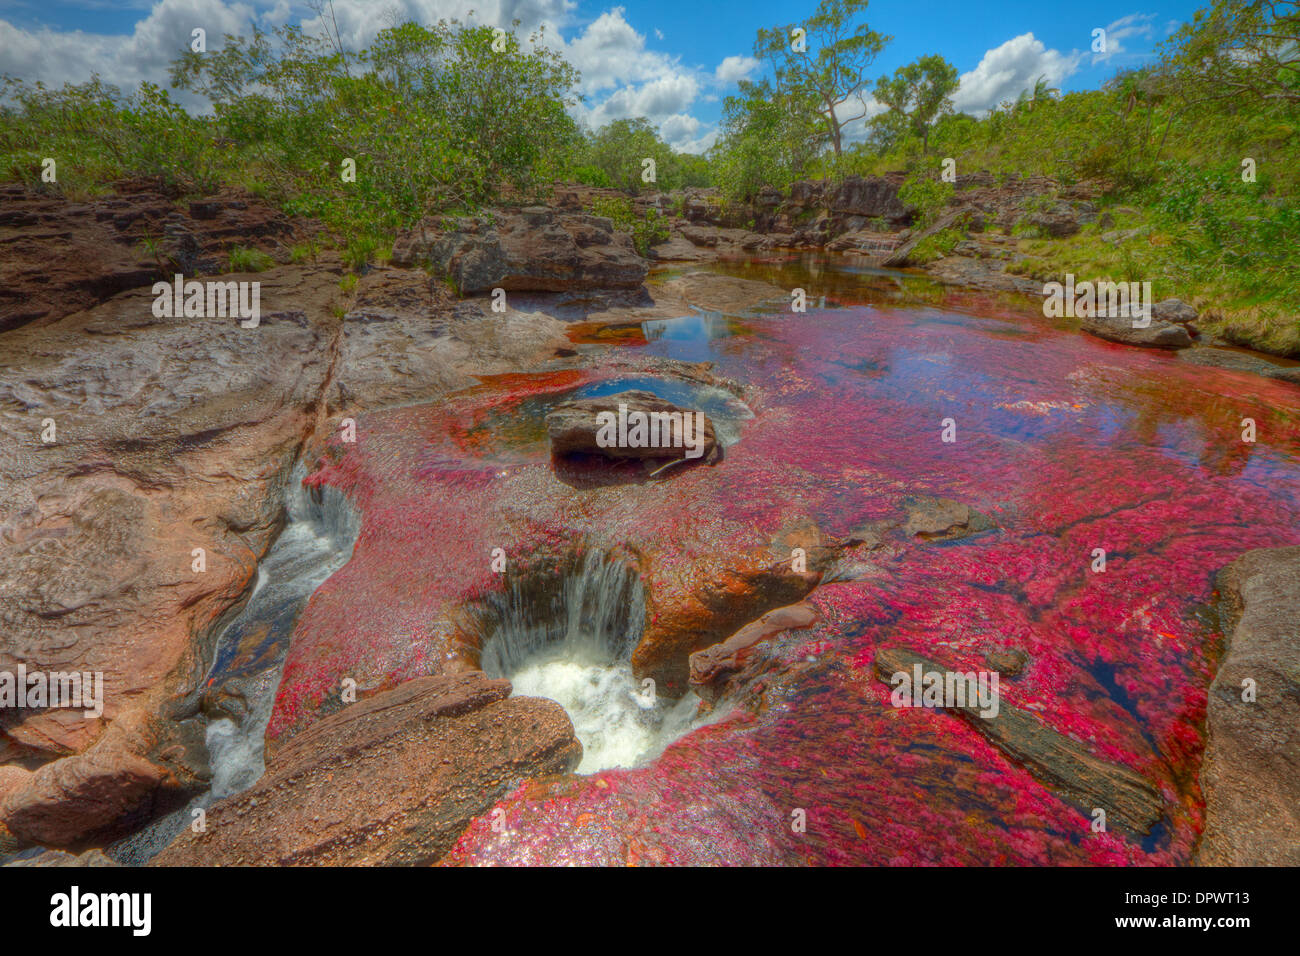 Colors at Cano Cristales, Colombia Underwater plants (Macarenia clarigera) endemic to small stream and area, Llano area Stock Photo